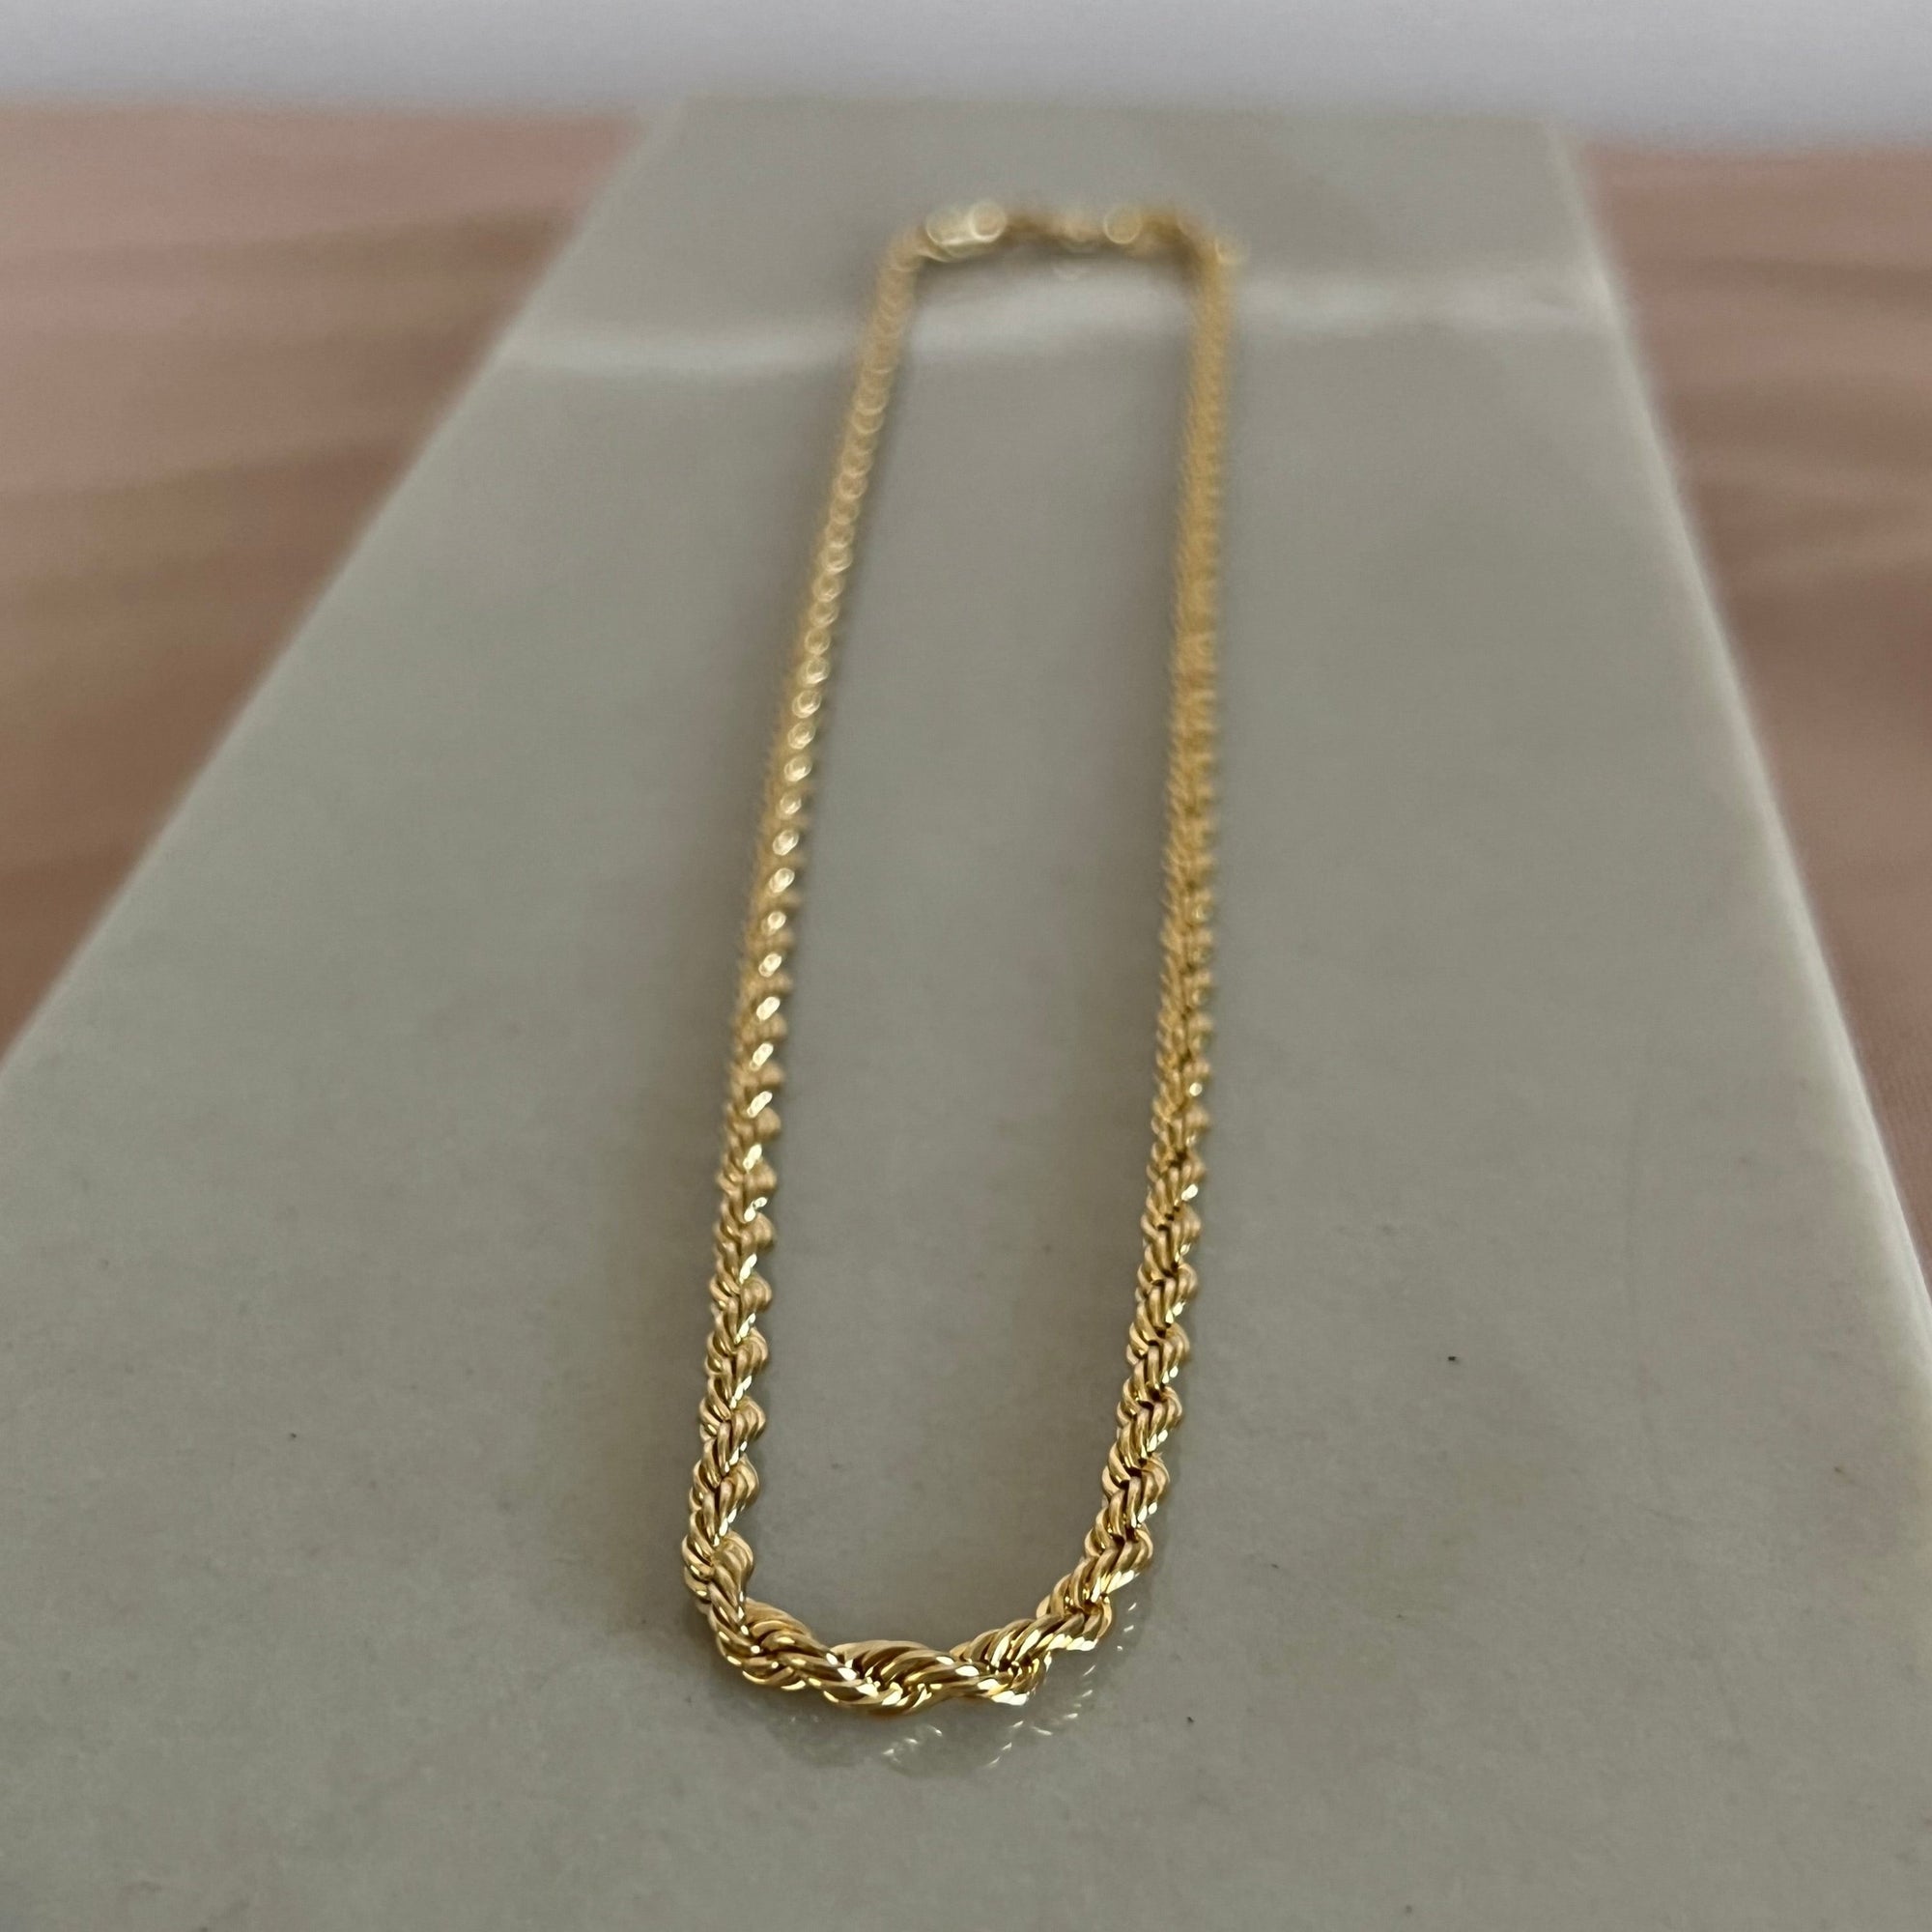 Bailey Rope Chain Necklace